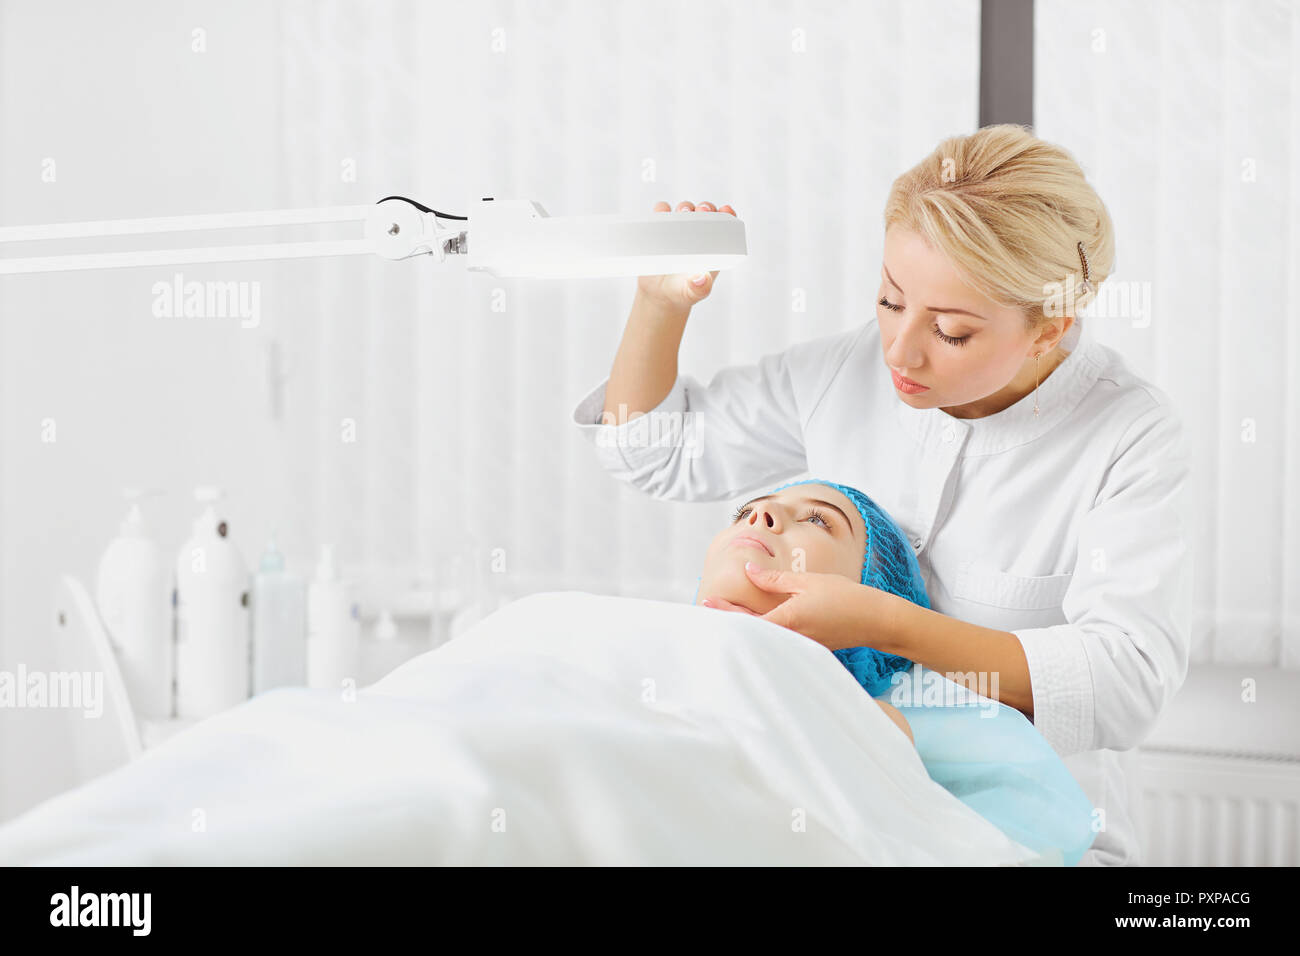 A female dermatologist examines the face of a girl. Stock Photo